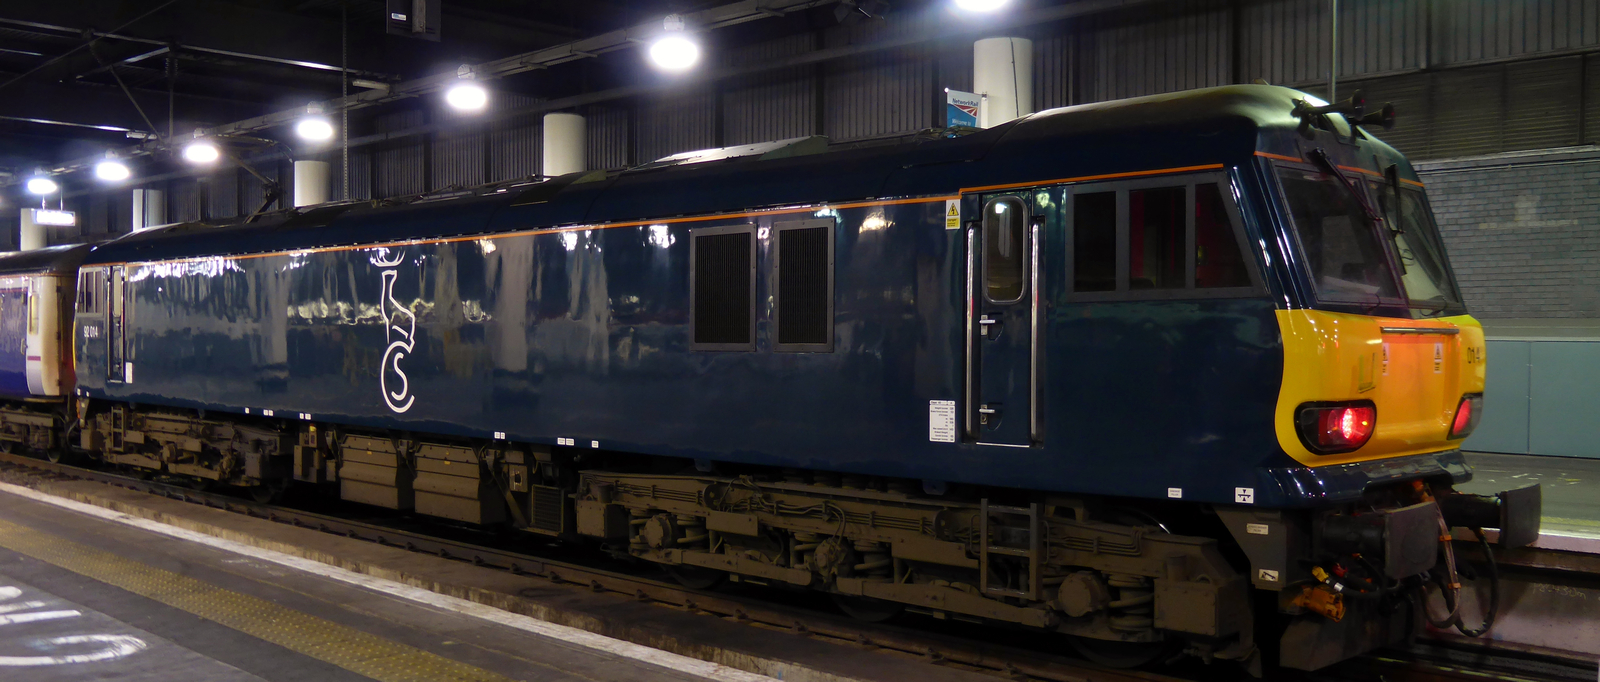 92014 in the livery of the Caledonian Sleeper at London Euston in March 2017